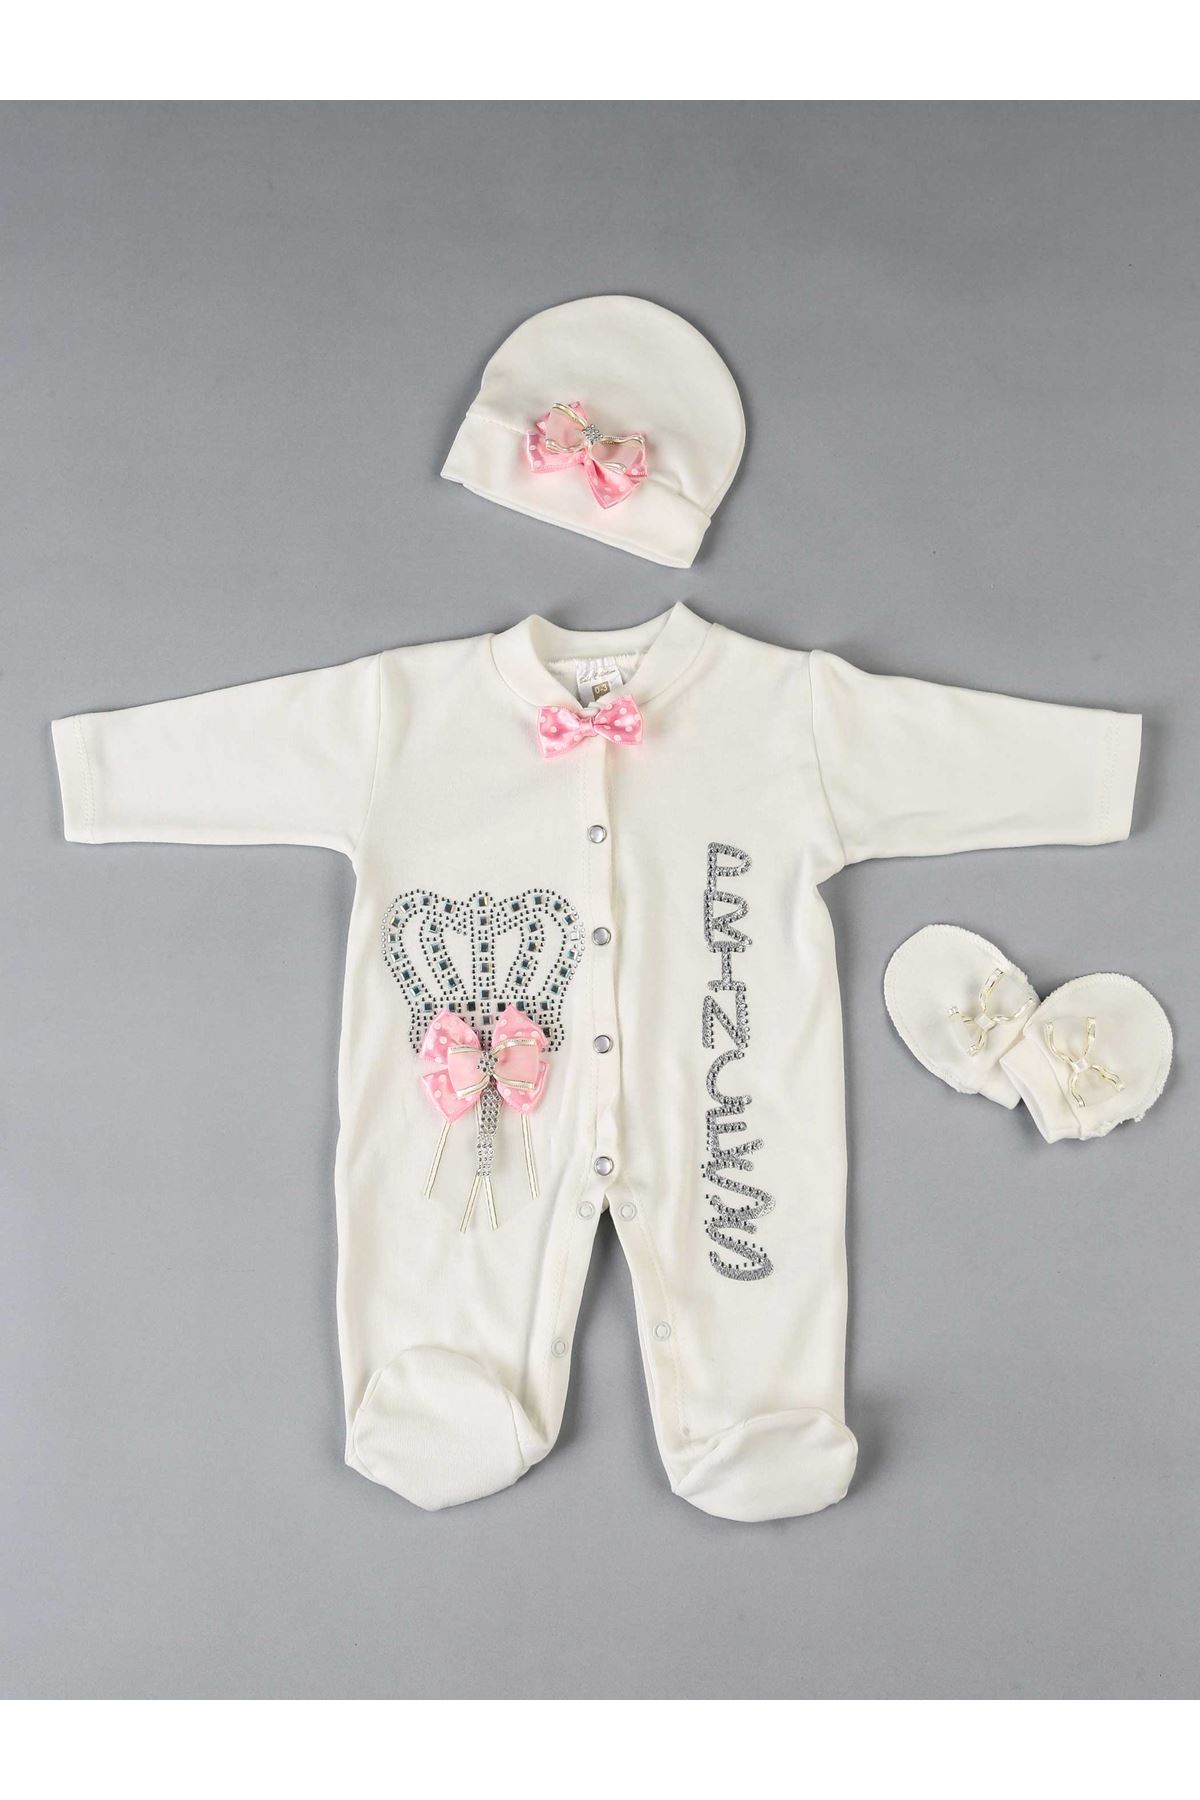 Pink Princess Baby Girl Suit Queen Crowned 3 Pieces Jumpsuit newborn Clothing Outfit Girls Babies Cotton Antiallergic Model